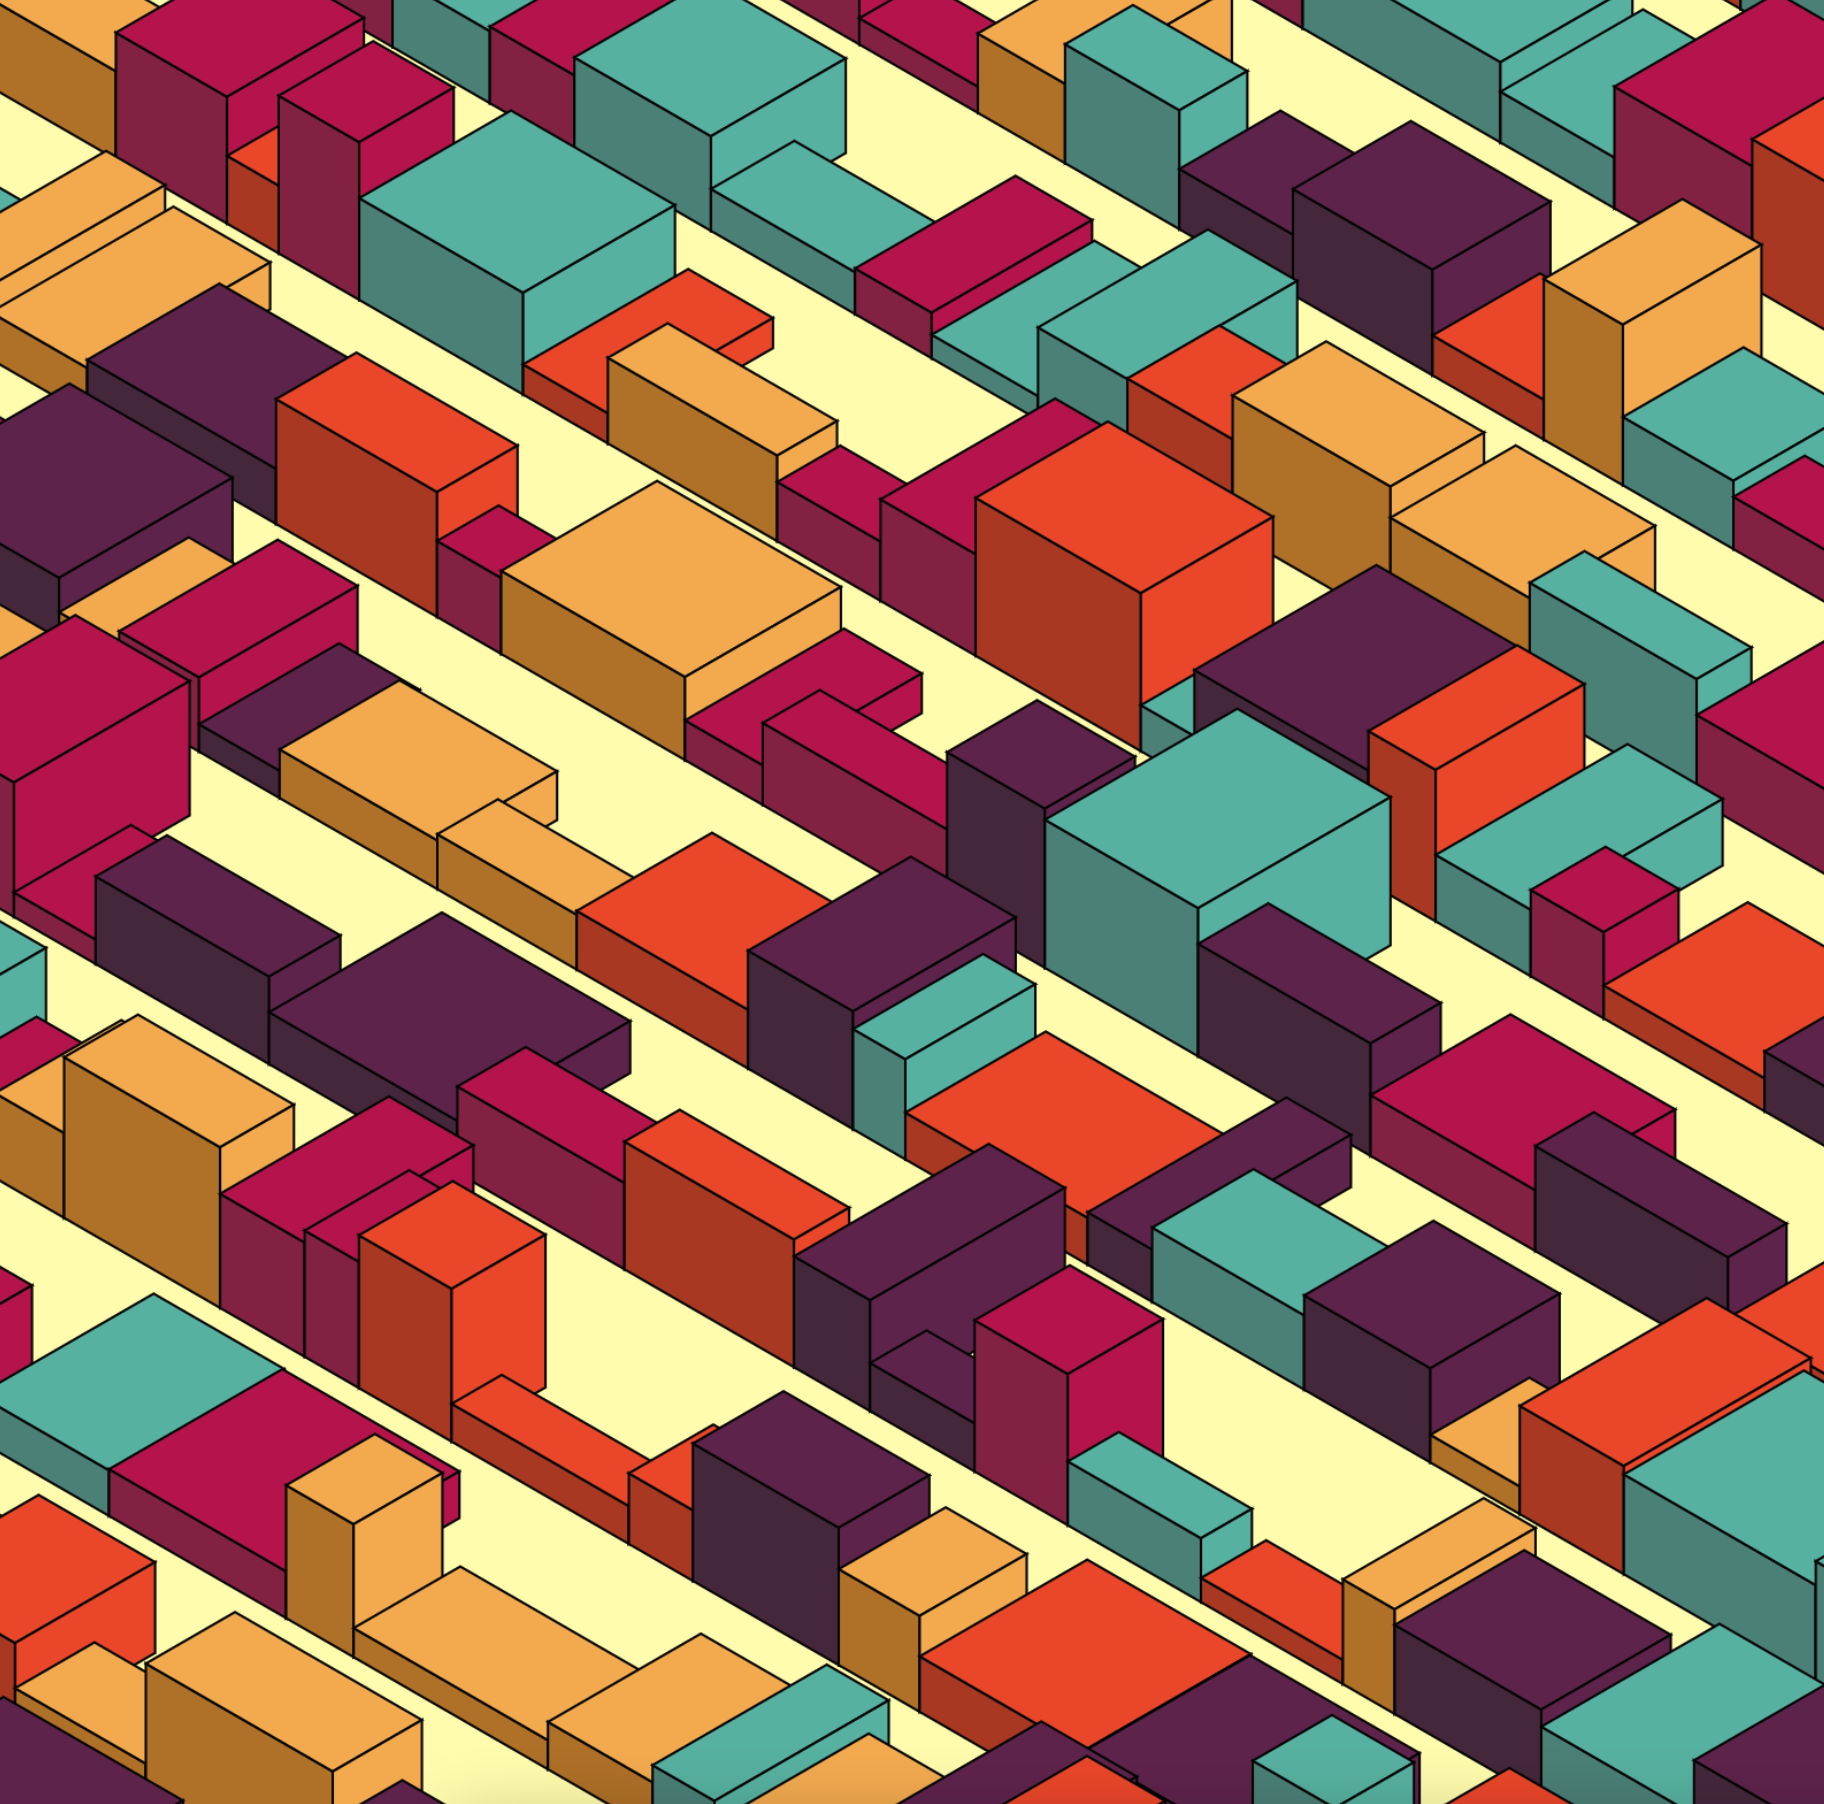 Generative Isometric drawing of different rectangular prisms